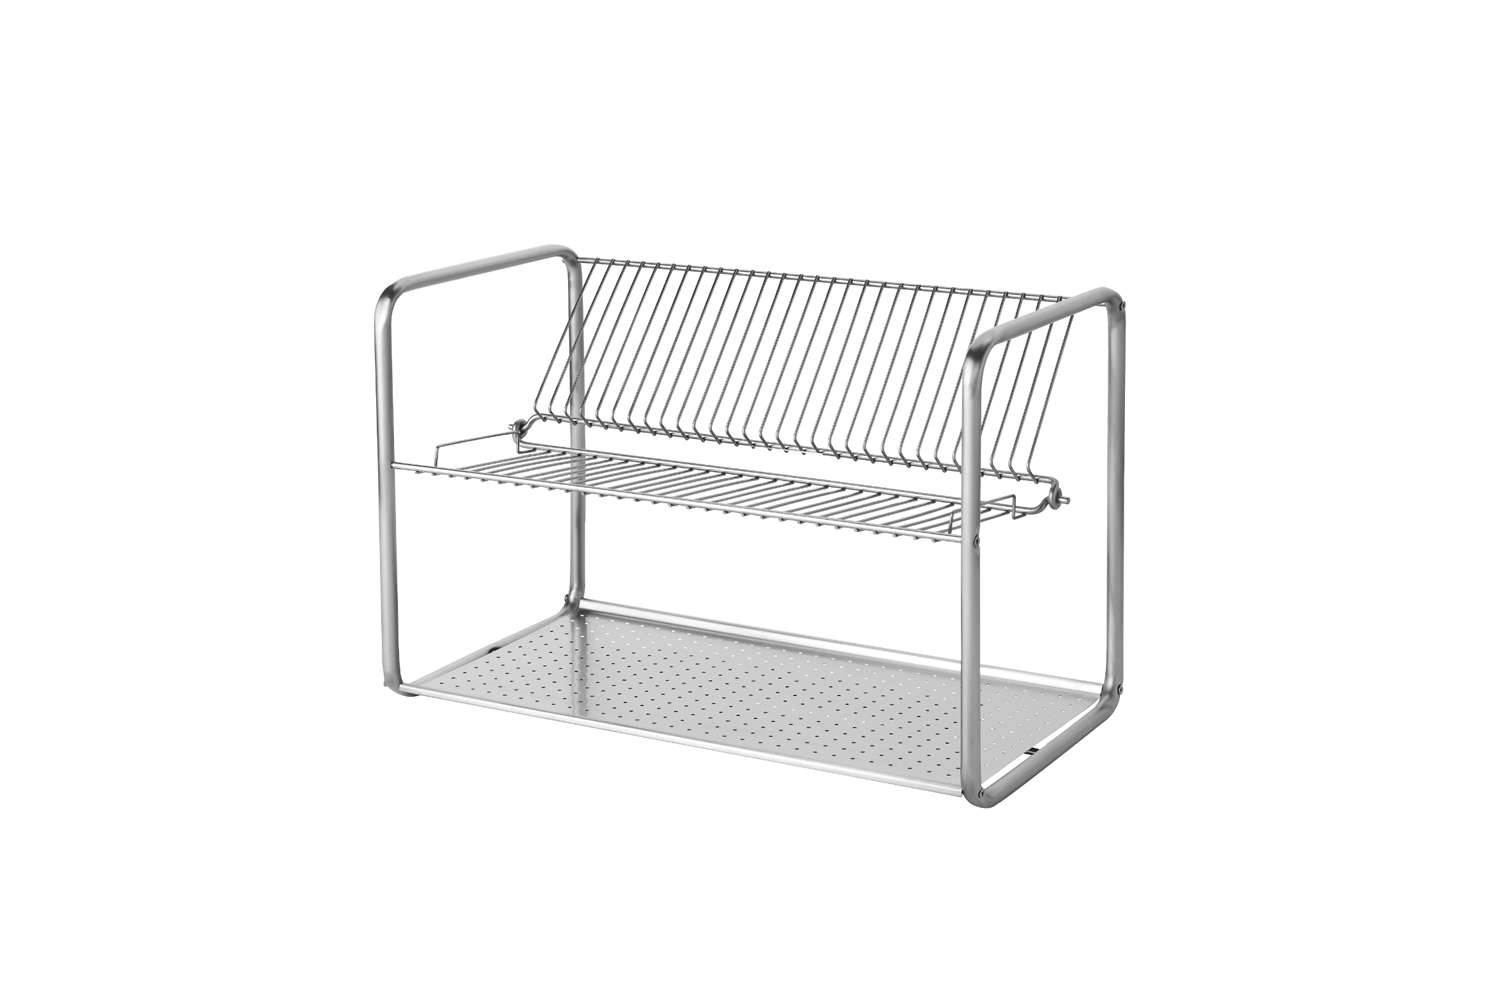 Ikea Ordning Dish Drainer Stainless Steel